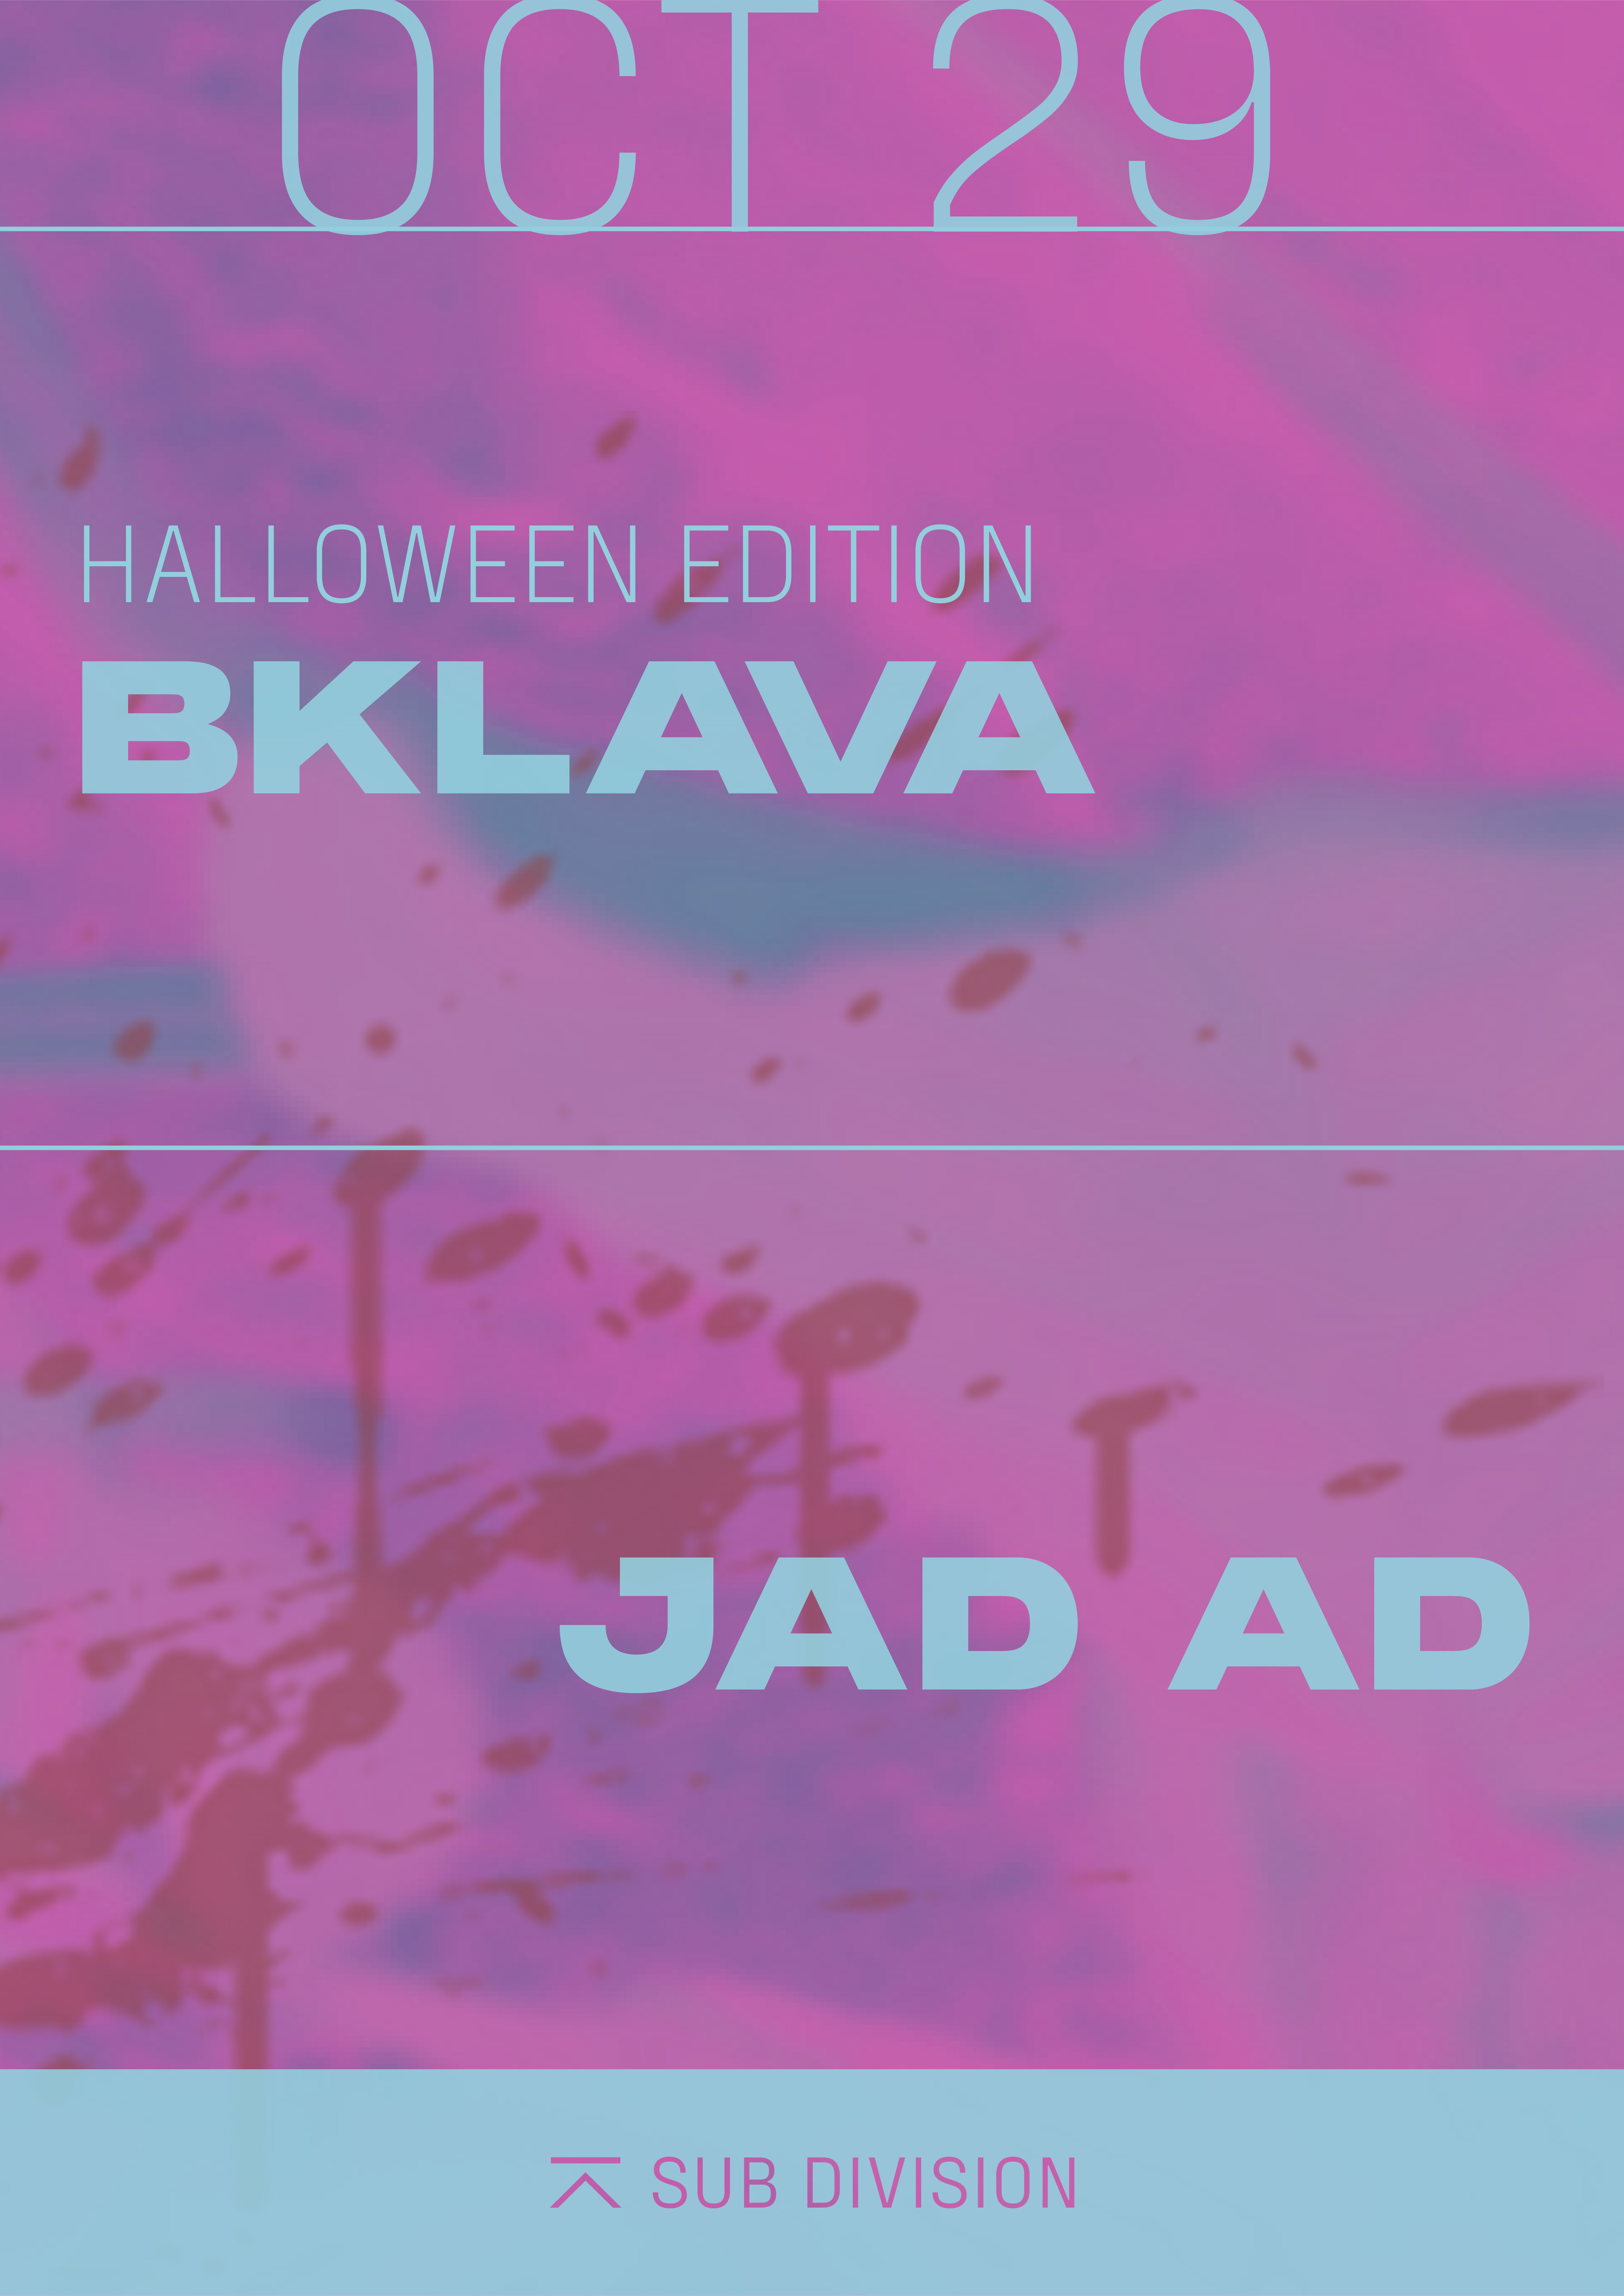 Halloween Edition: Bklava (Defected Records / Ministry of Sound) - Flyer back